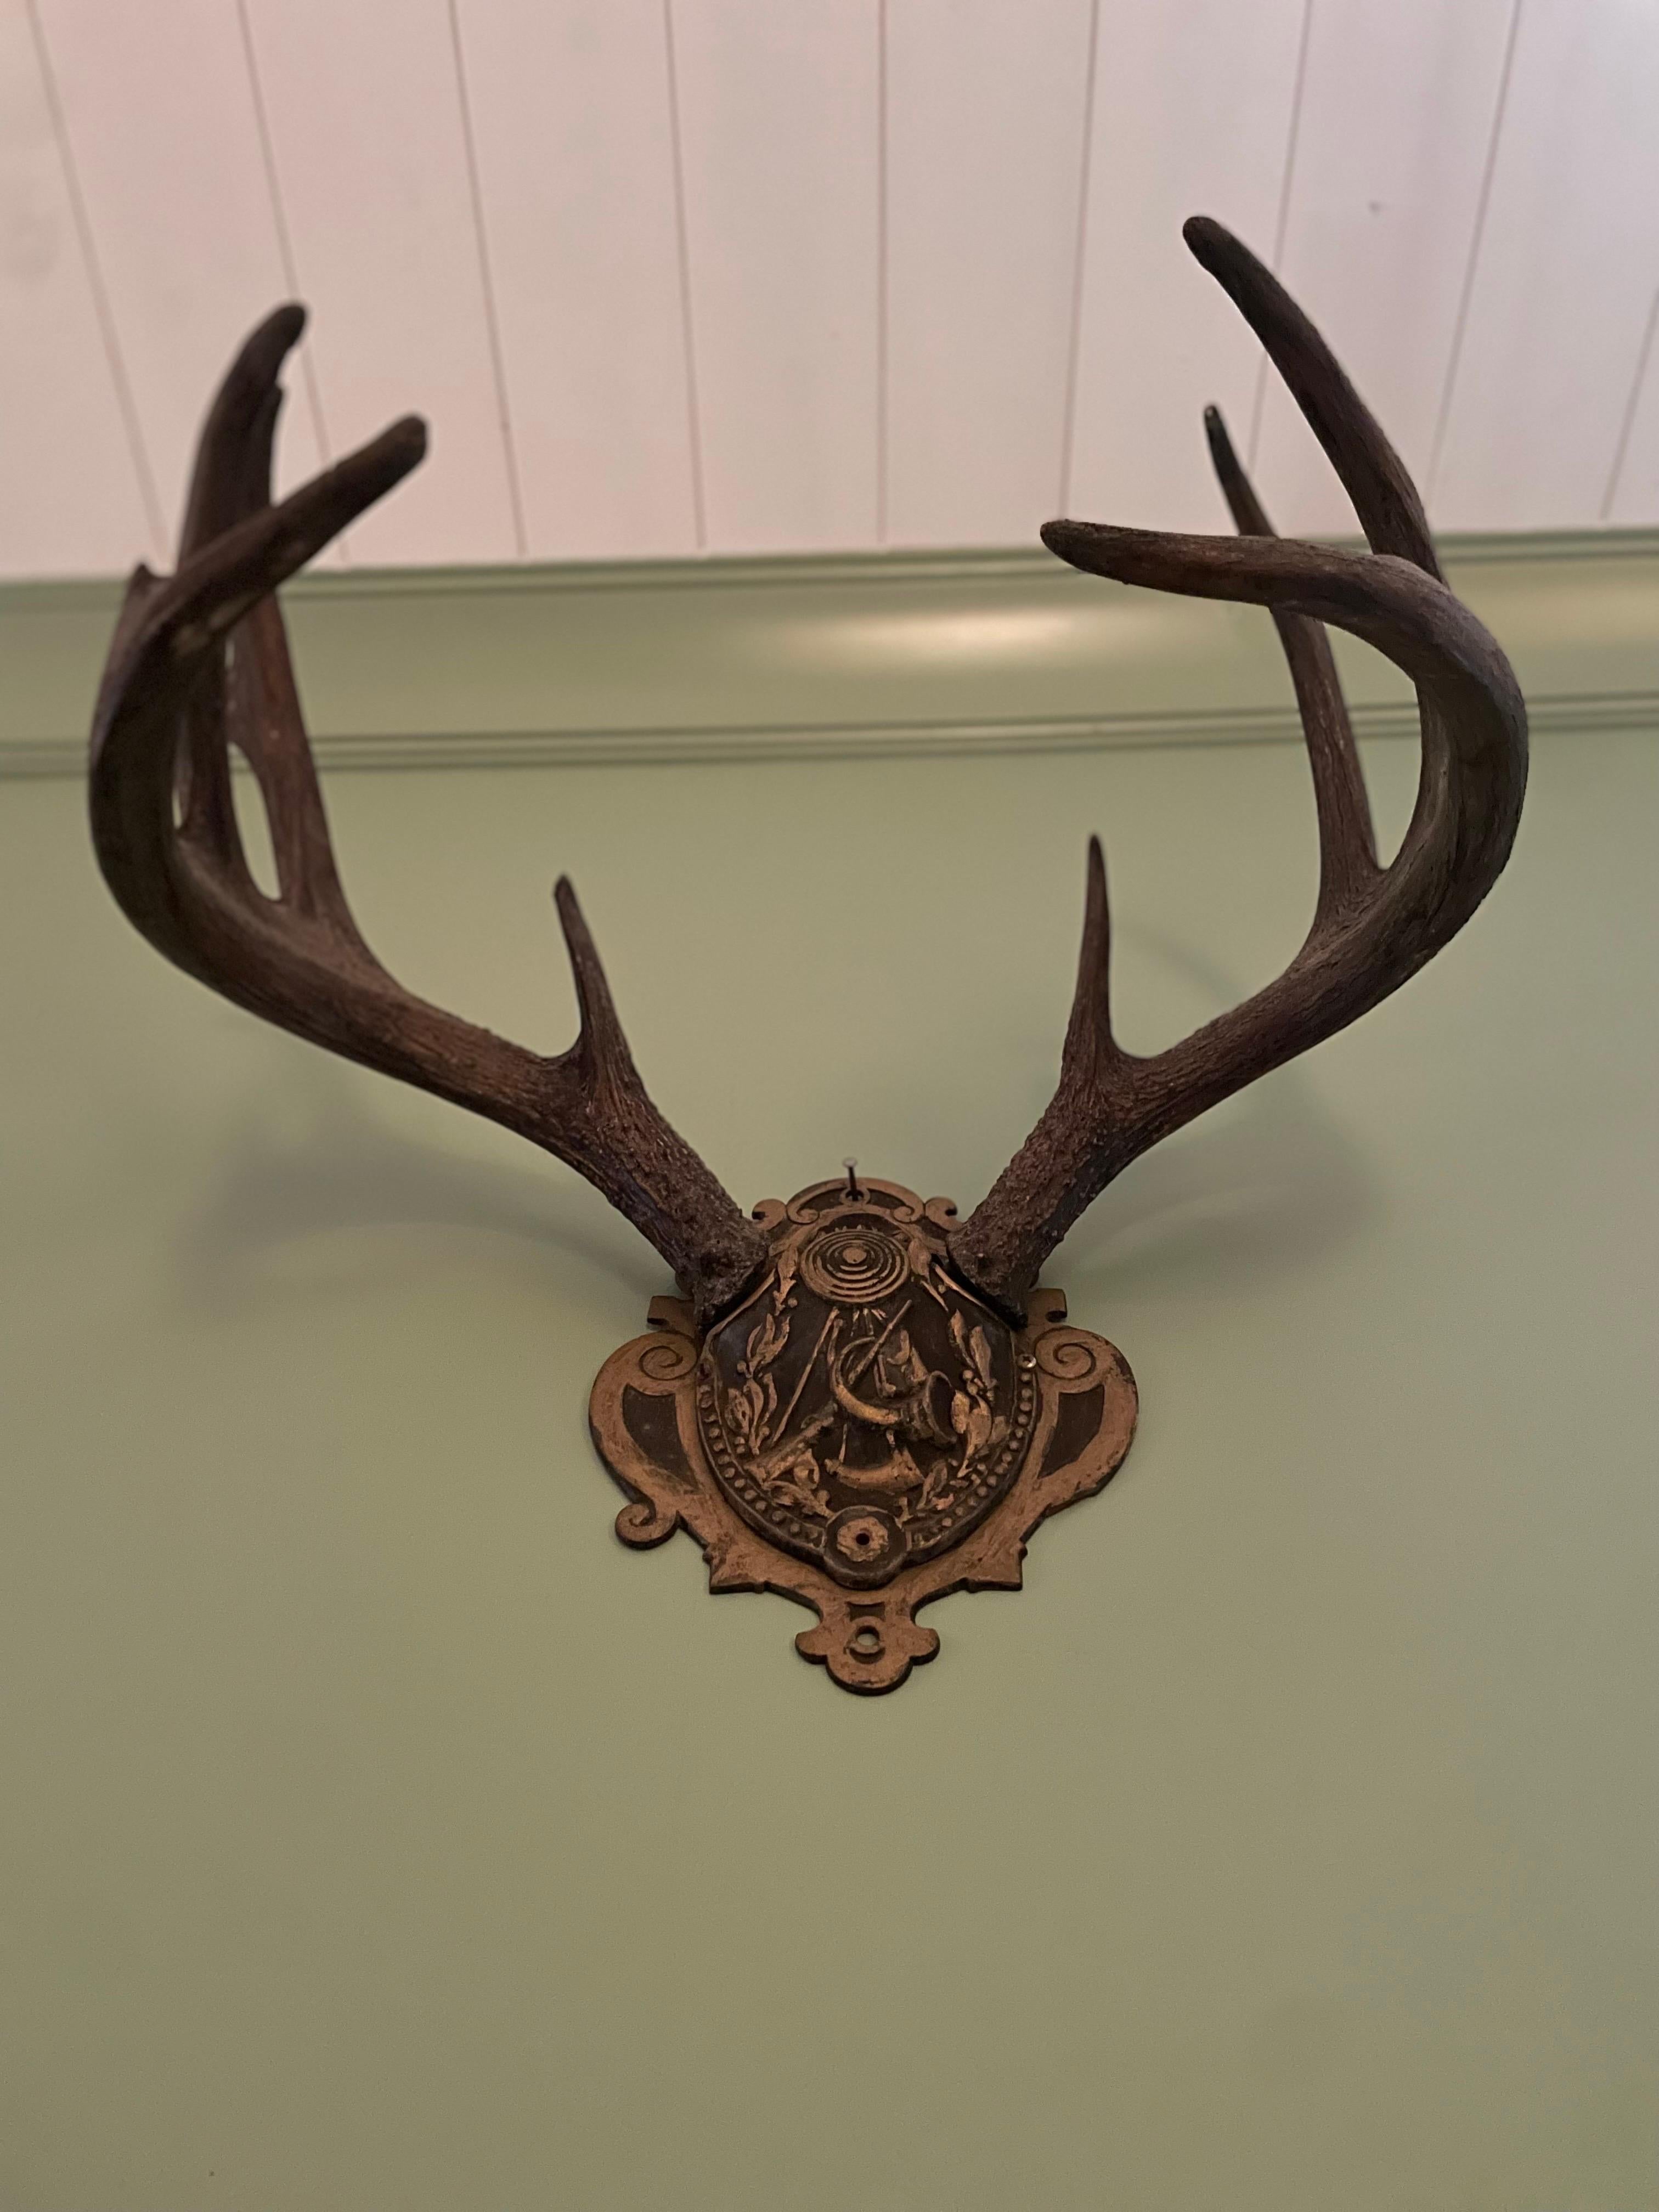 Mid 20th Century German Antlers on Iron Plate Deer Antler Wall Plaques

Gorgeous and Unusual German Antlers on Detailed Iron Plate. Iron plate says Paton pending. Deer Antler Wall Plaques. Pictures do not do these antlers Justice very beautiful in